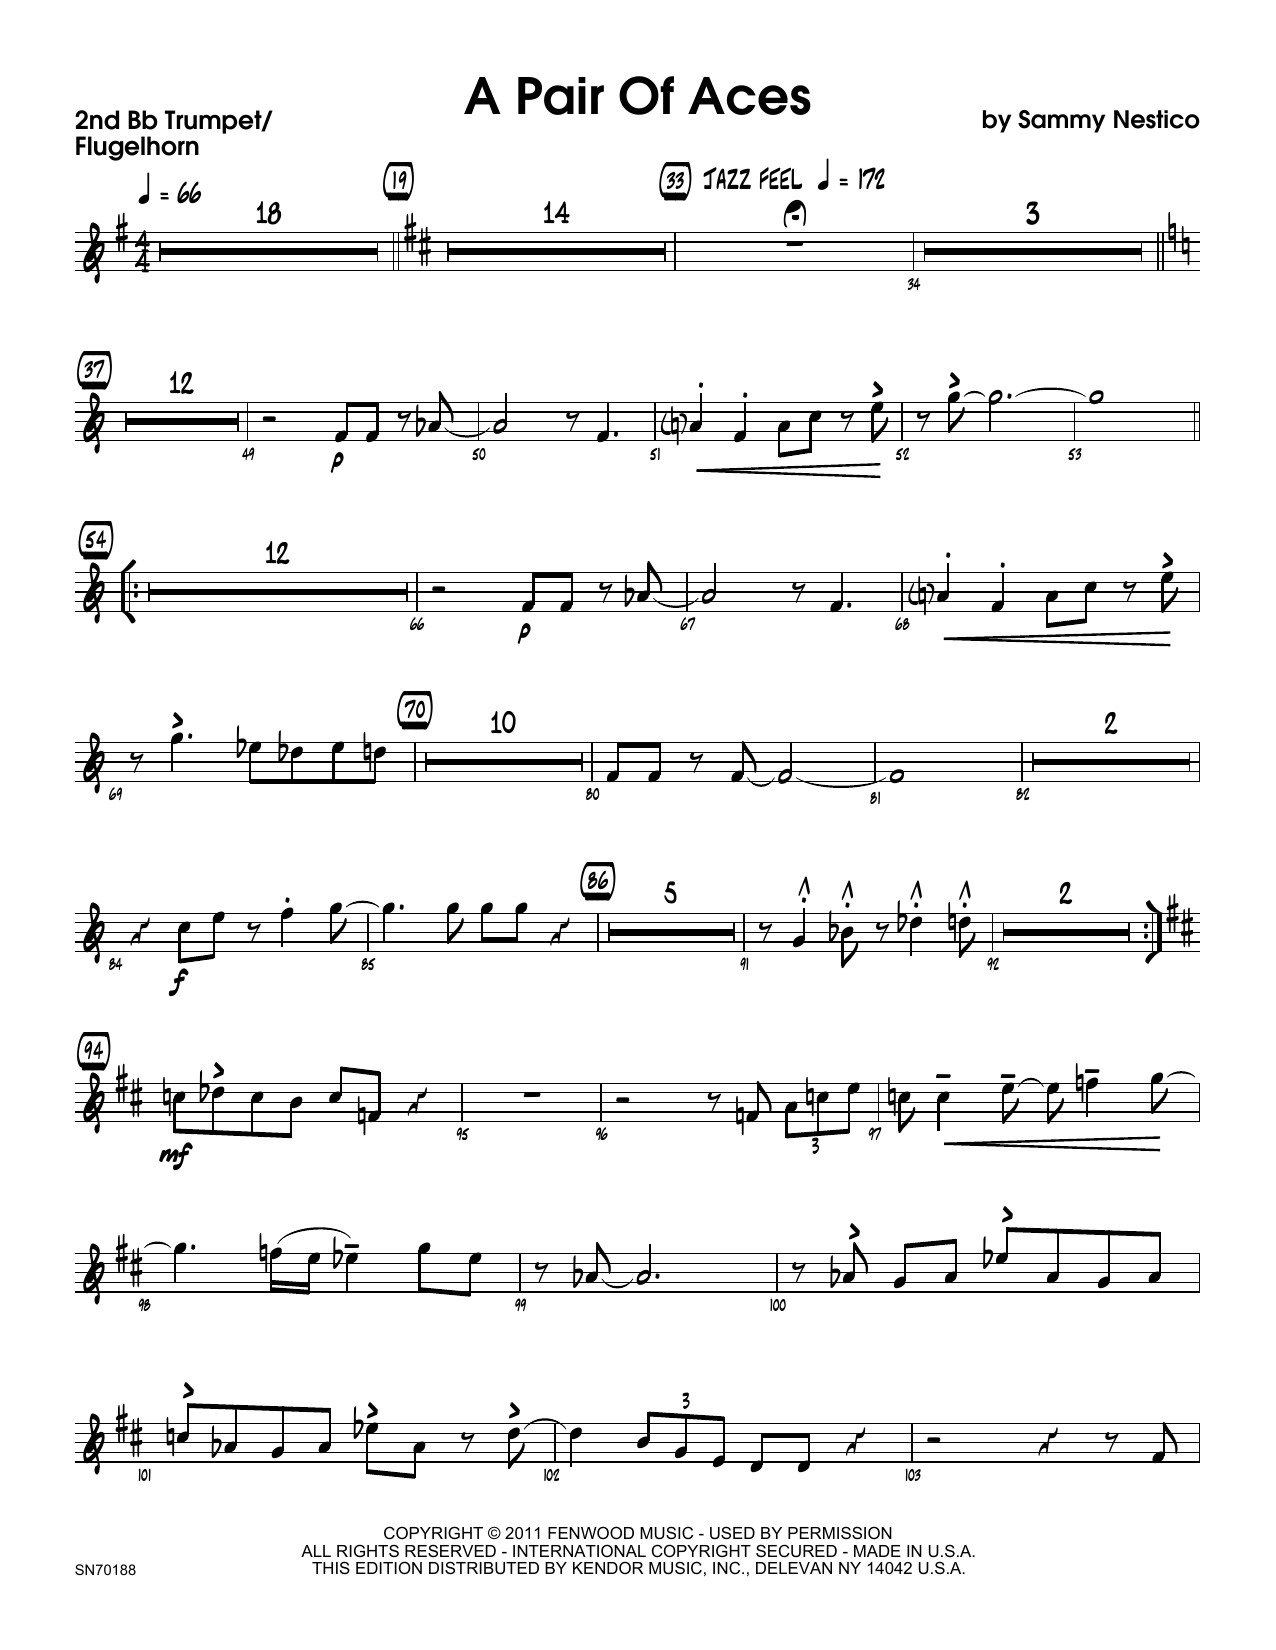 Download Sammy Nestico A Pair Of Aces - 2nd Bb Trumpet Sheet Music